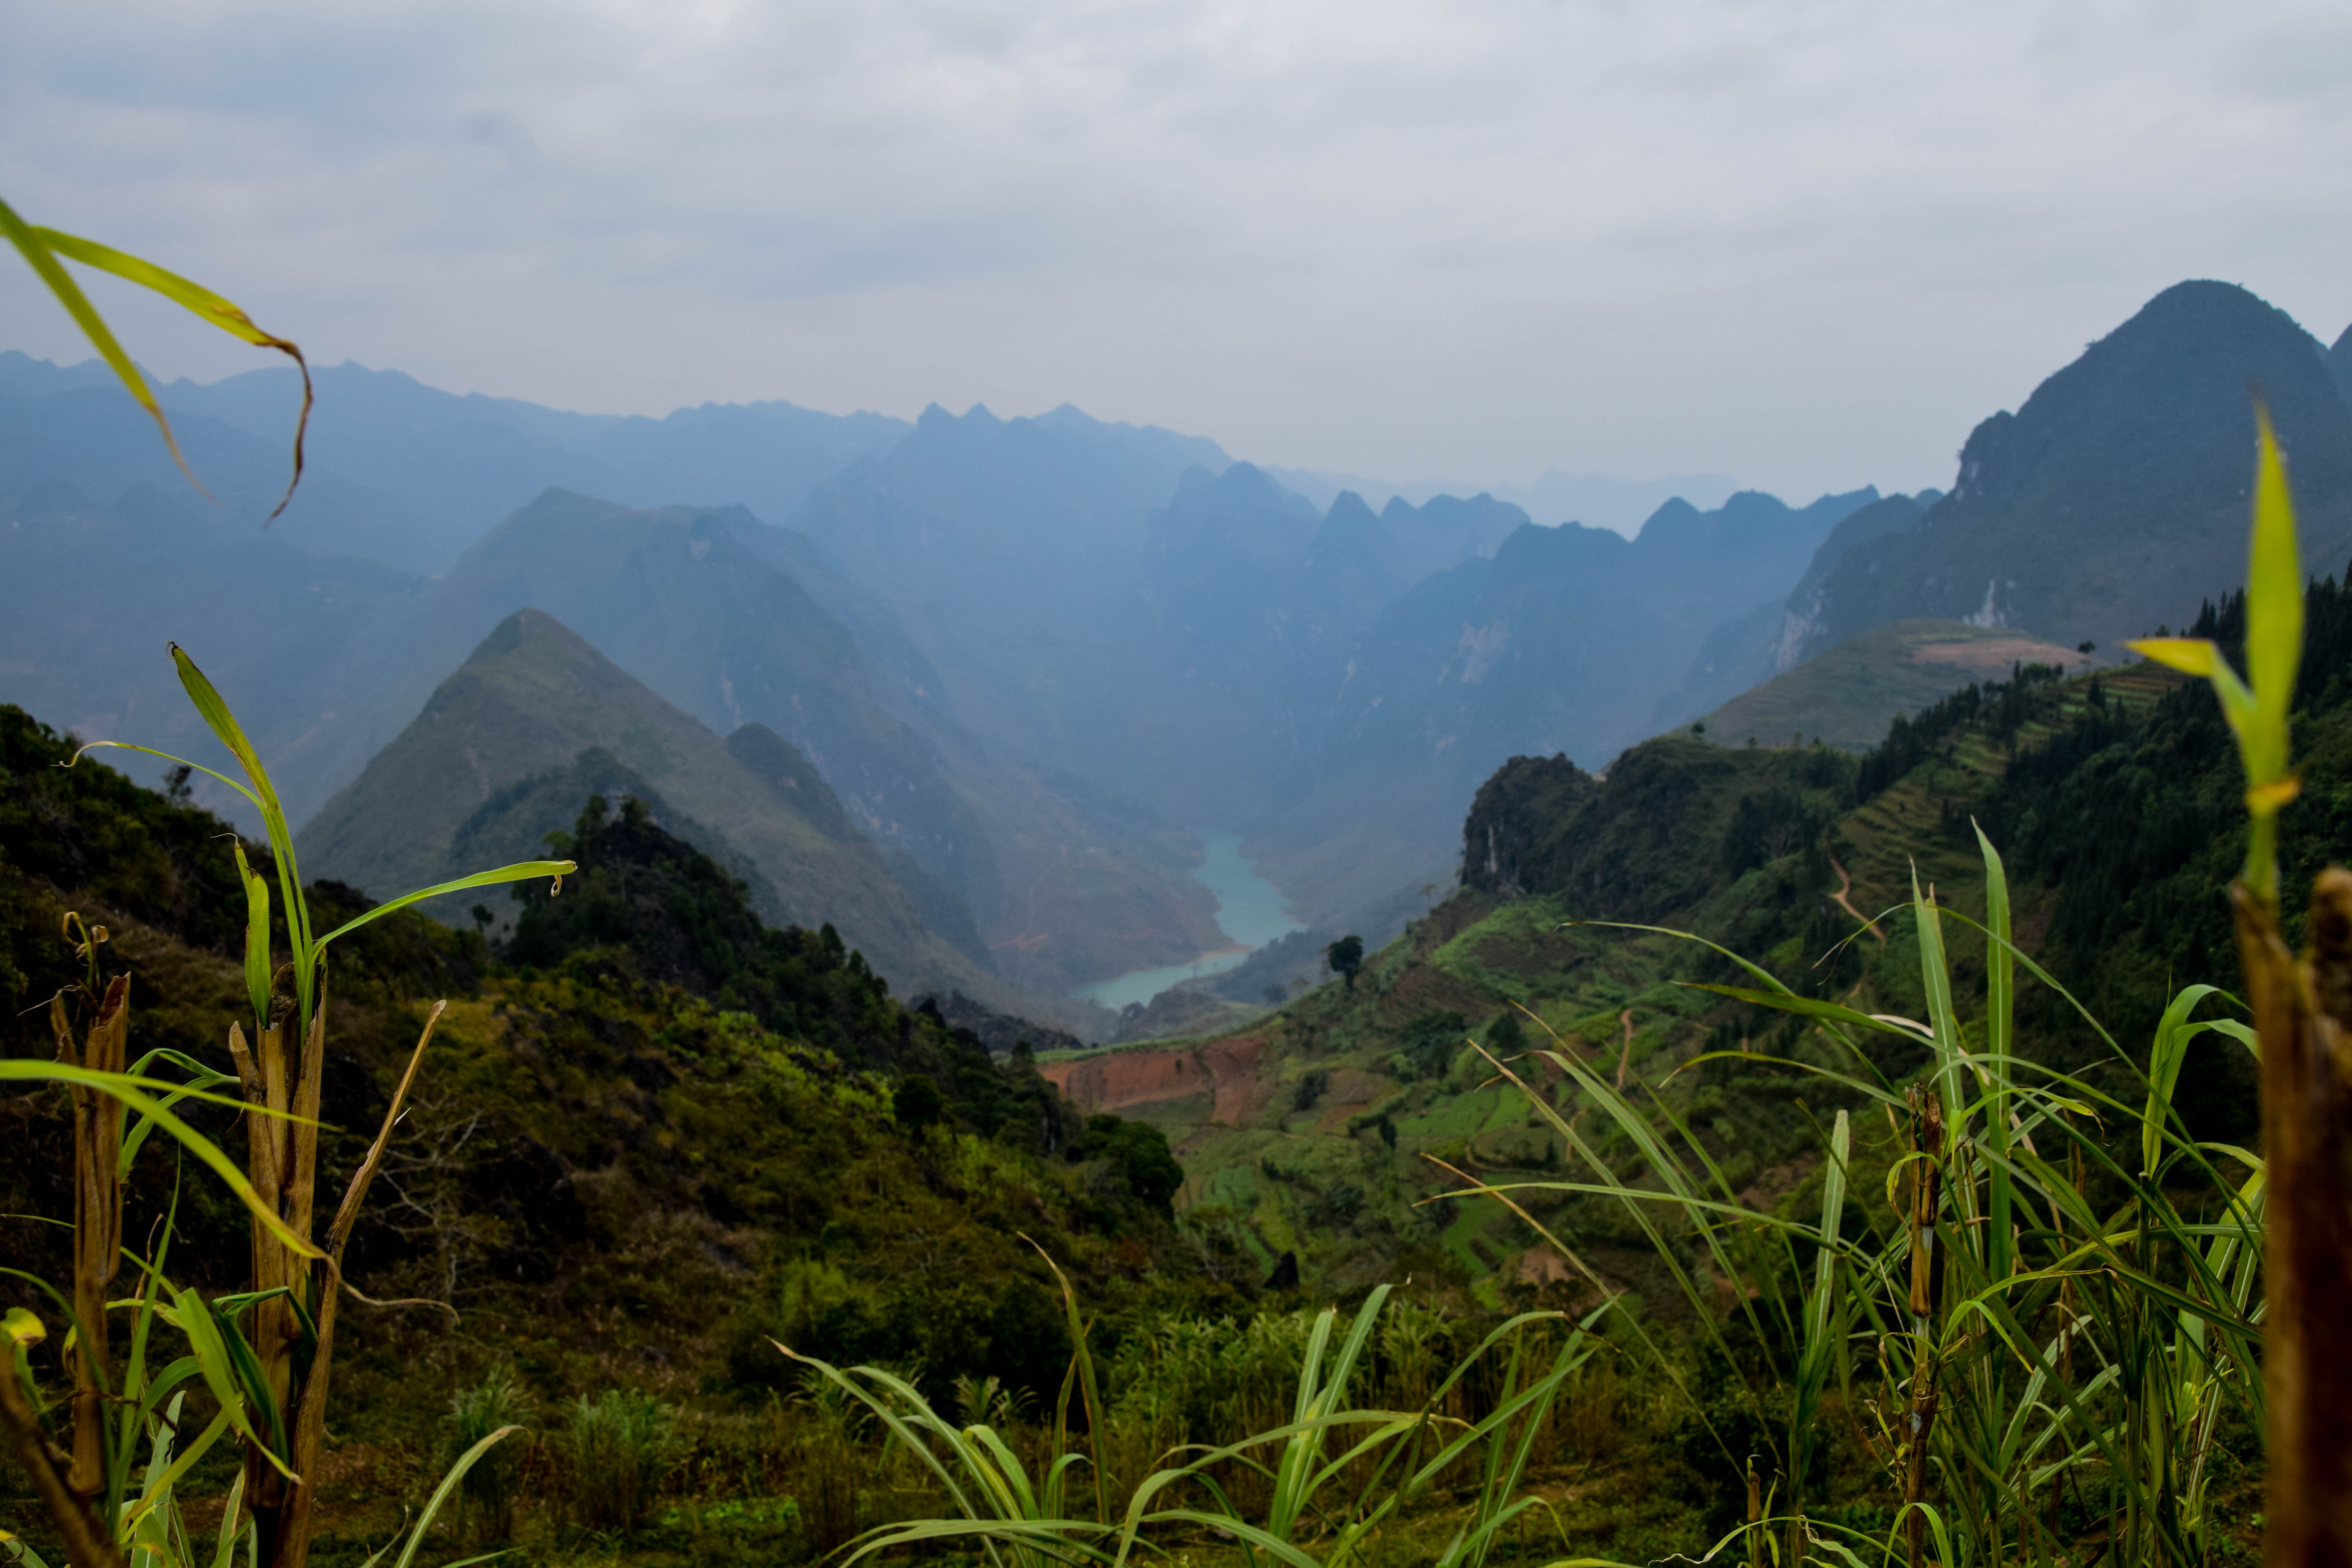 The Way to Ha Giang